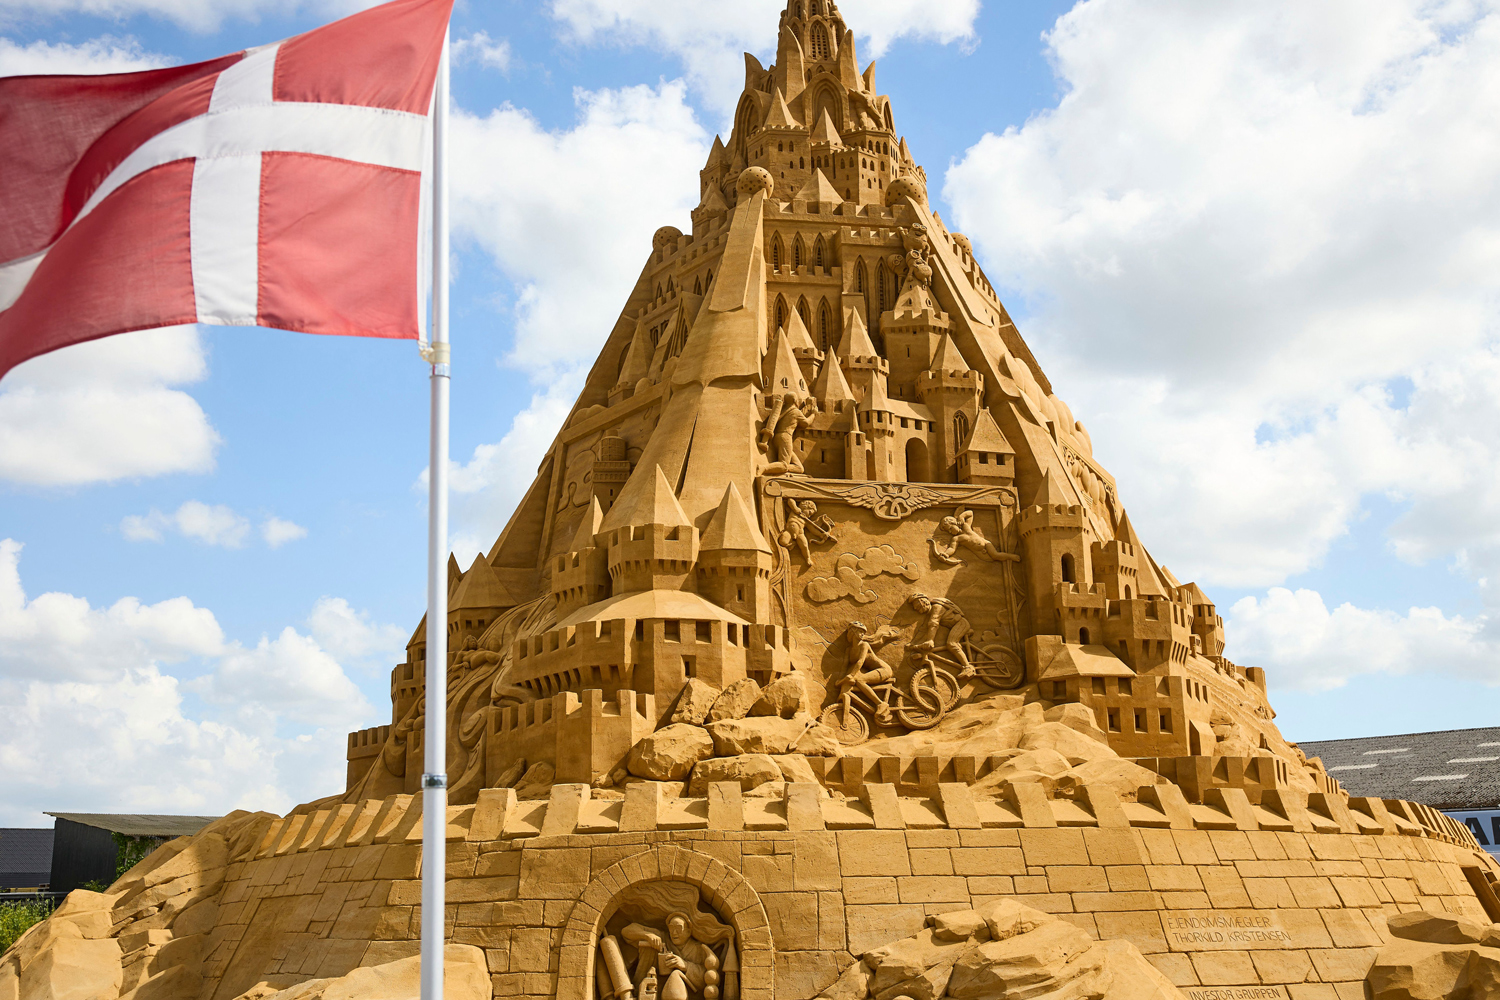 A large sandcastle with many turrets and an image of Cupids and people on bicycles.